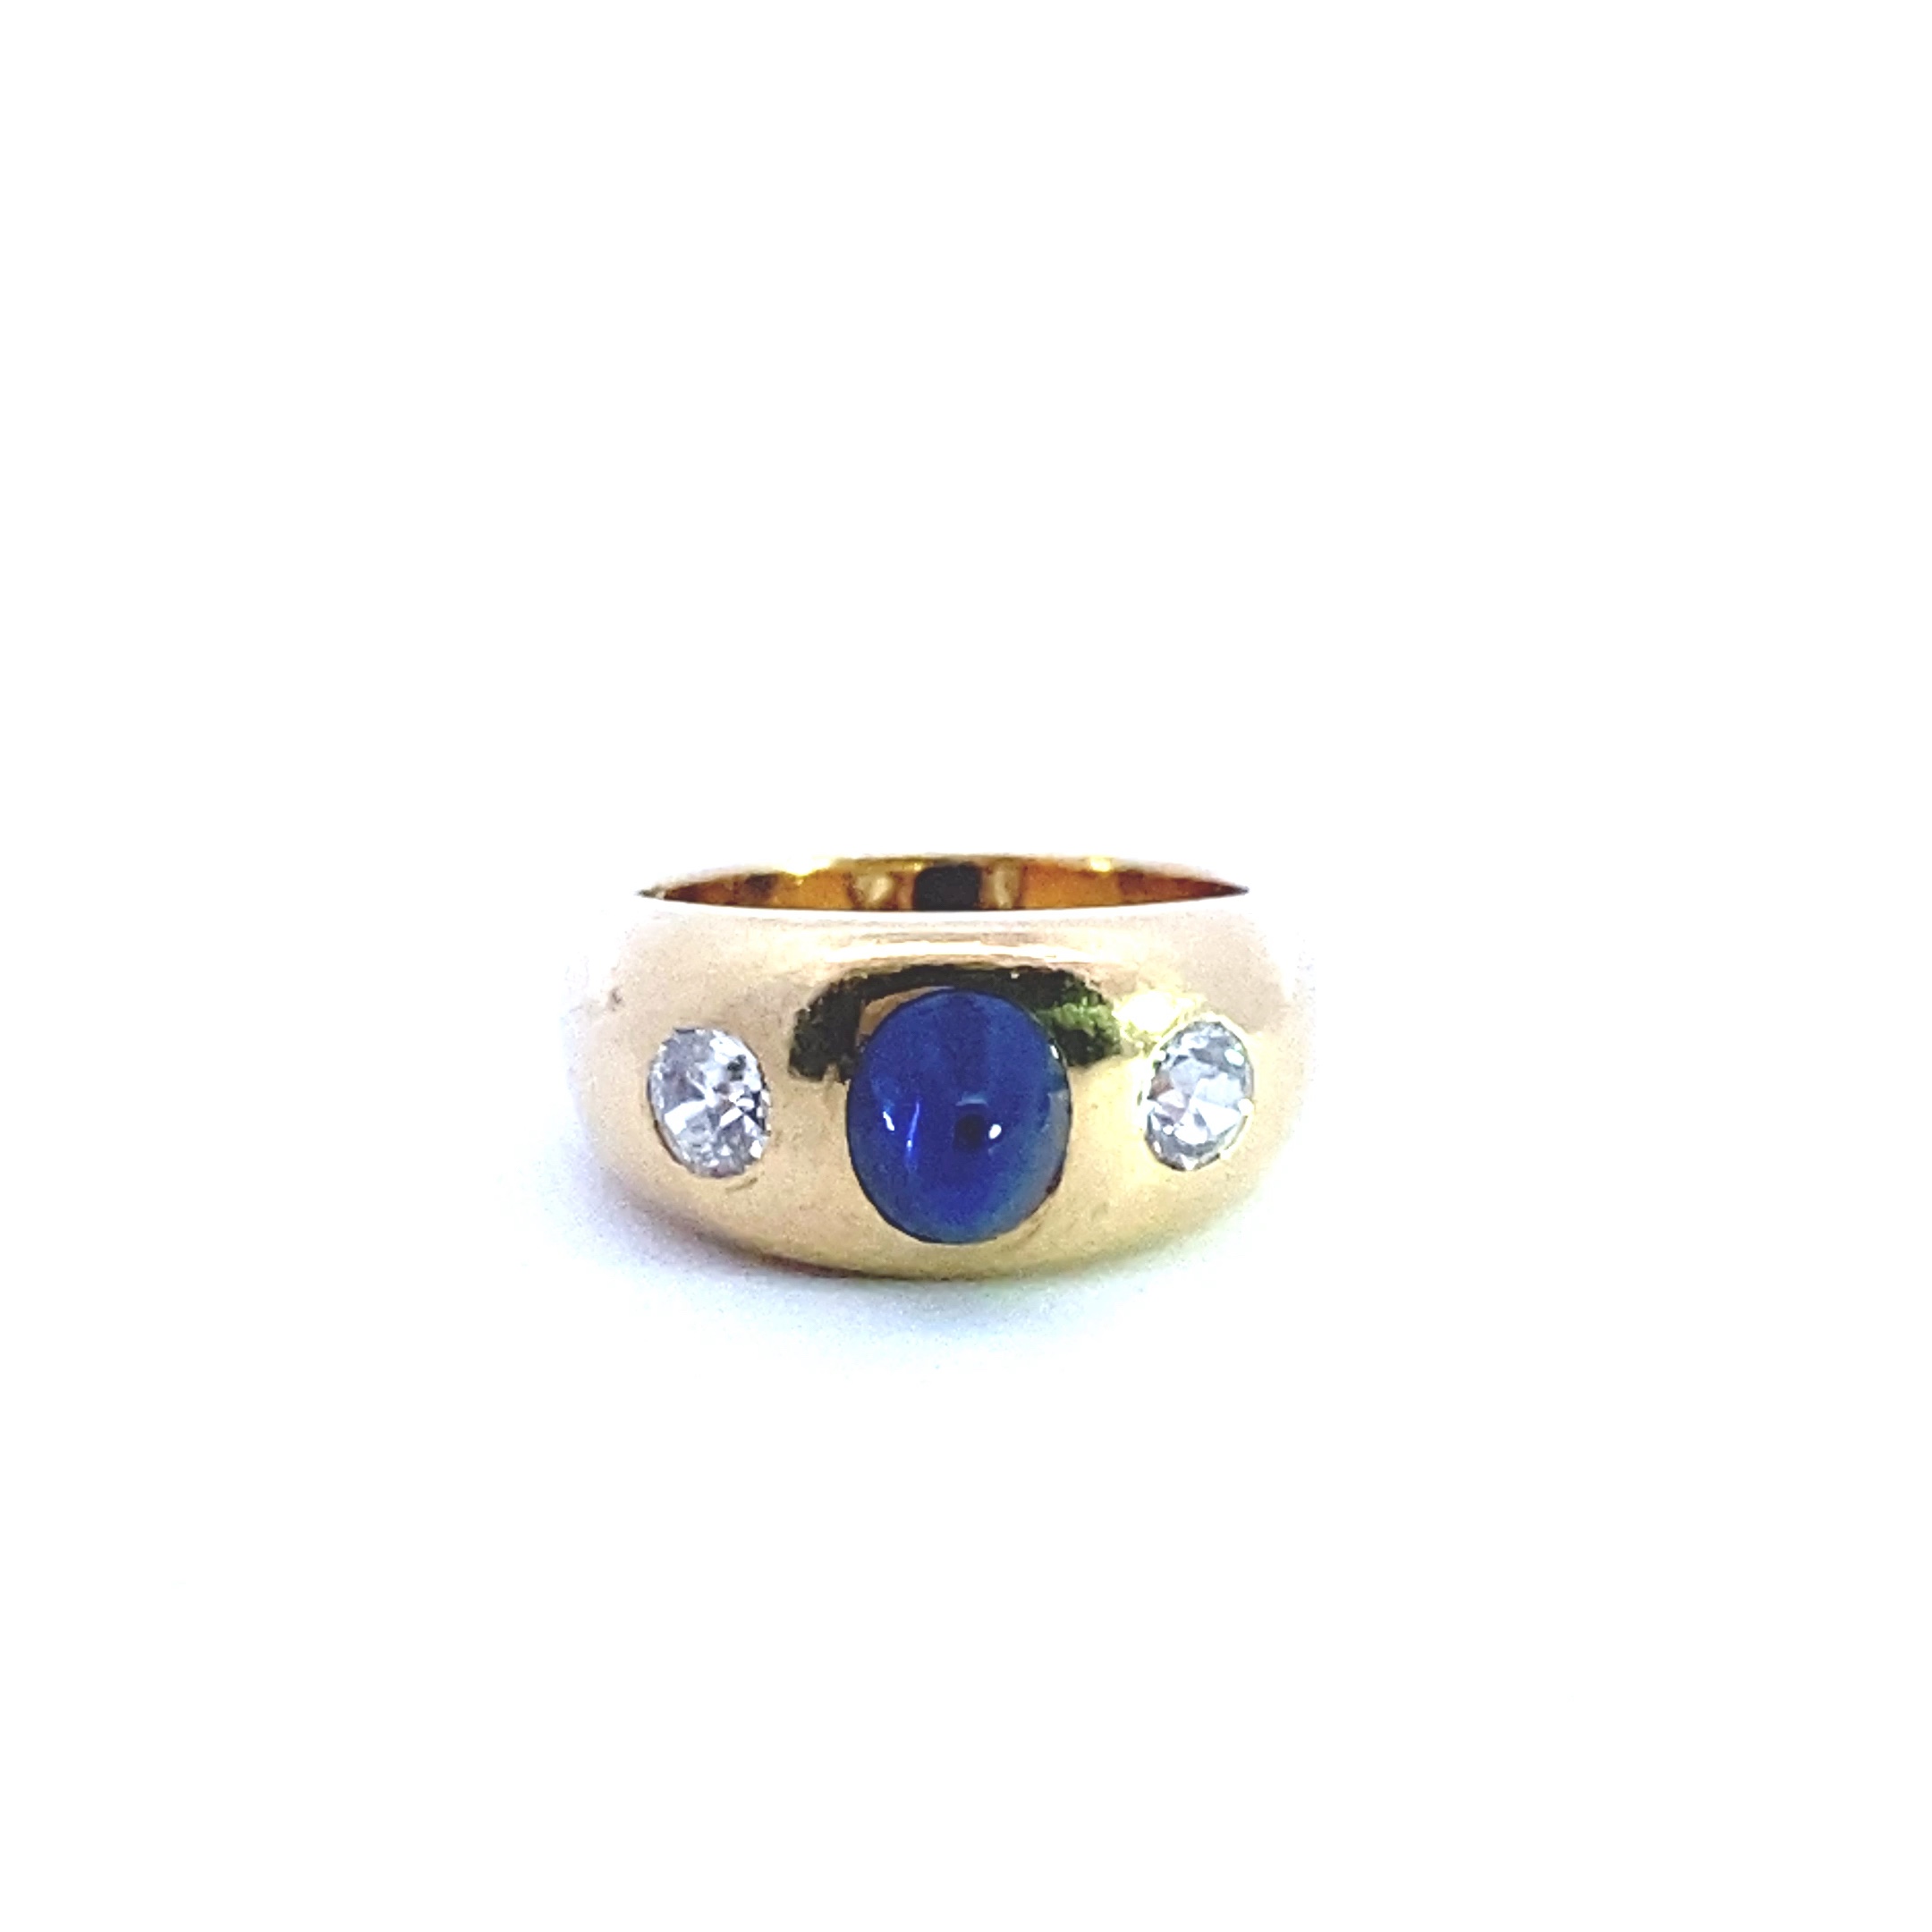 18ct Yellow Gold Sugarloaf Cabochon Sapphire Ring